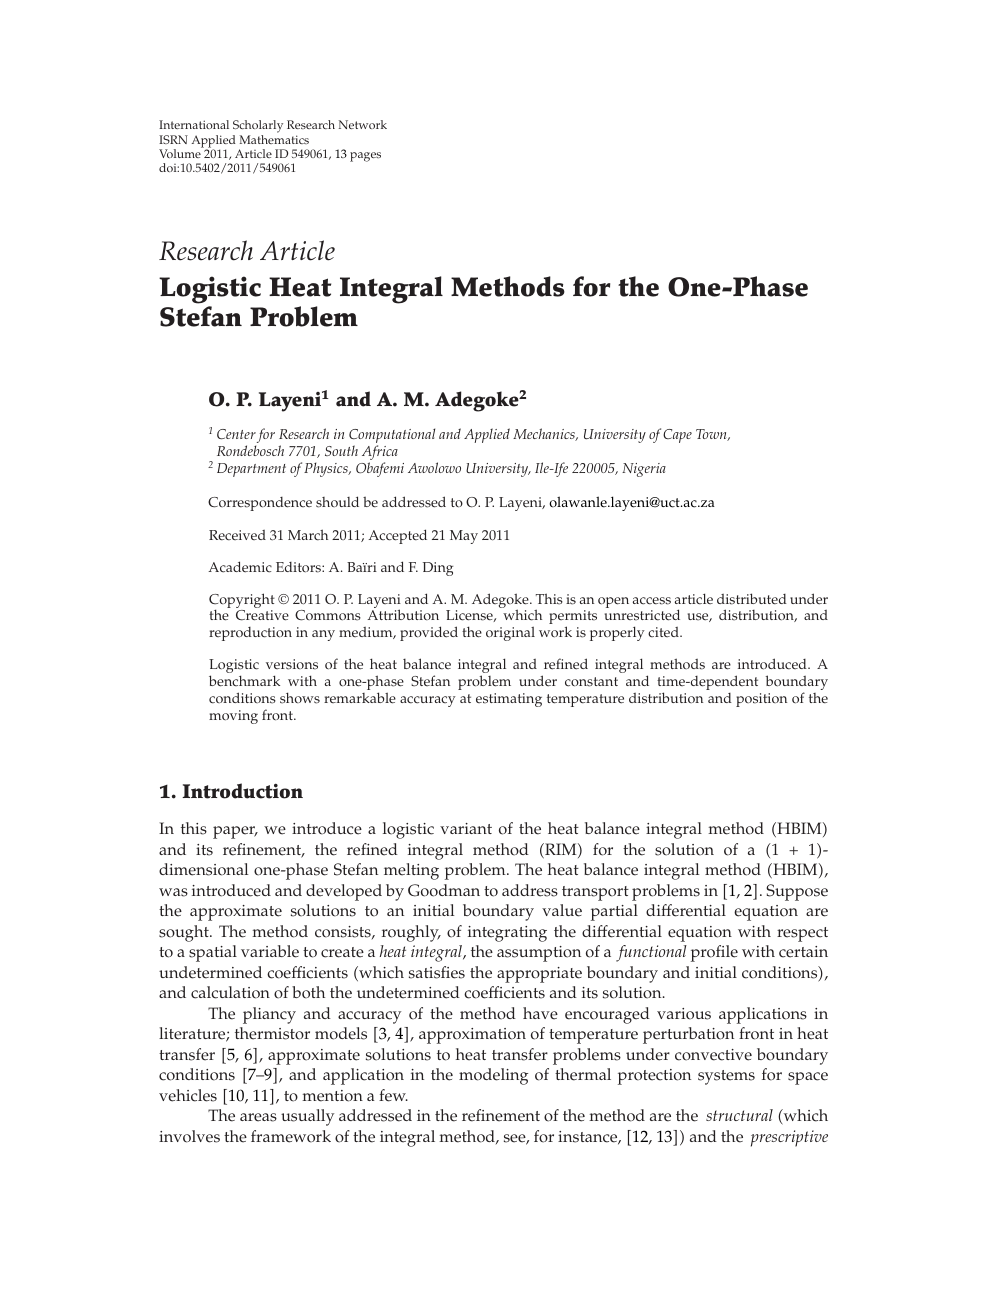 Logistic Heat Integral Methods For The One Phase Stefan Problem Topic Of Research Paper In Mathematics Download Scholarly Article Pdf And Read For Free On Cyberleninka Open Science Hub